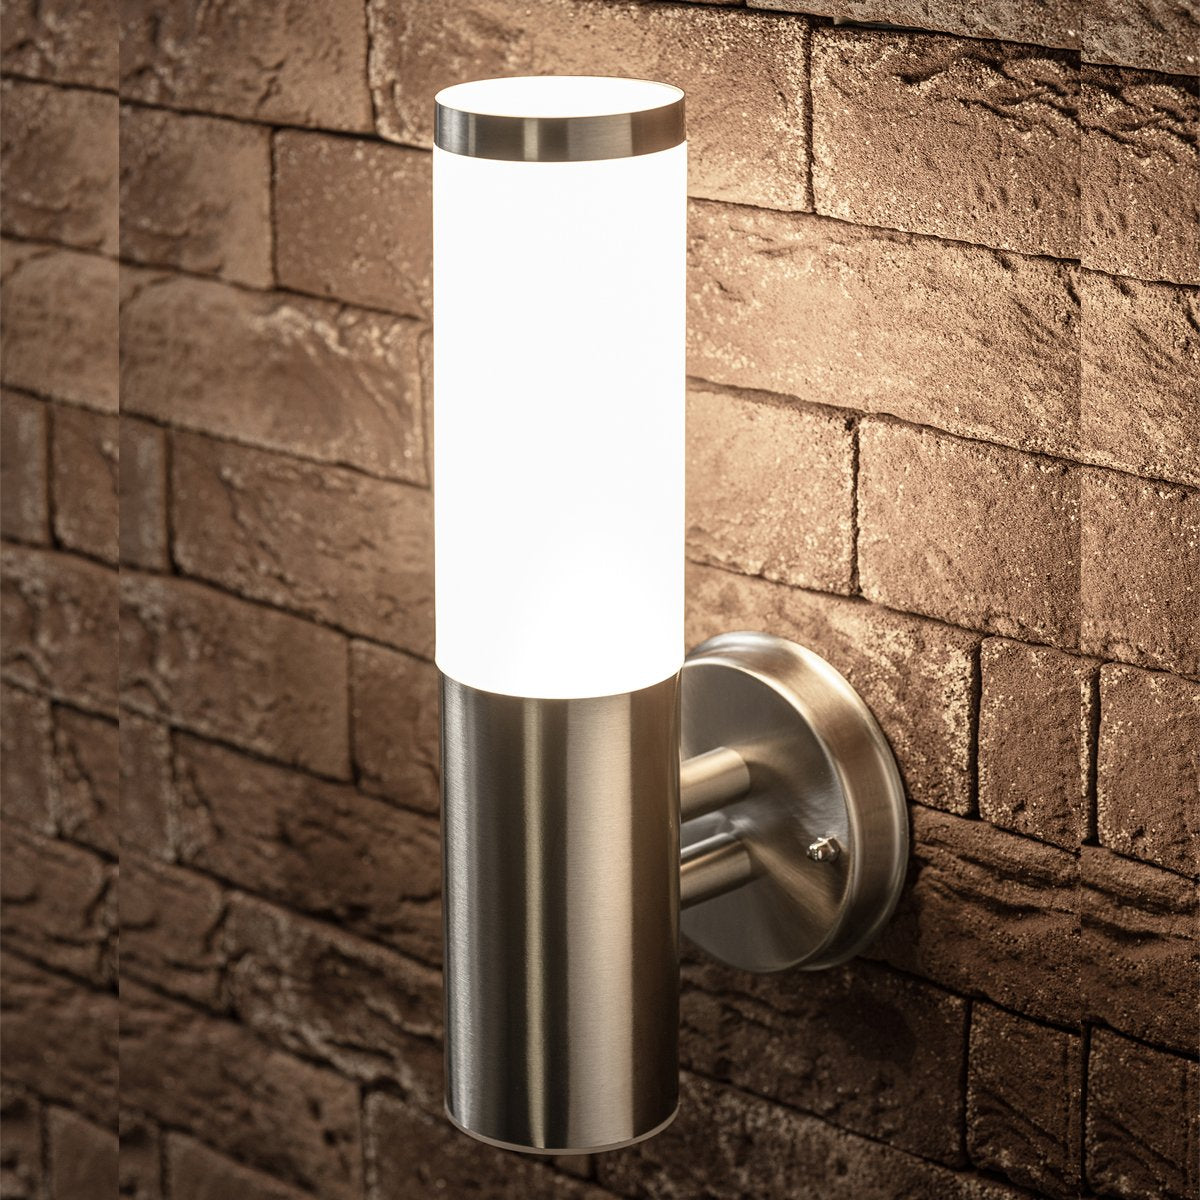 Our Aster wall light looks great in modern settings. Our wall light has a simple round design, and its stainless-steel body is complemented by an opal polycarbonate diffuser. This wall light is perfect for any outdoor space requiring light and security such as gardens, driveways, doorways workspaces, pubs and hotels.